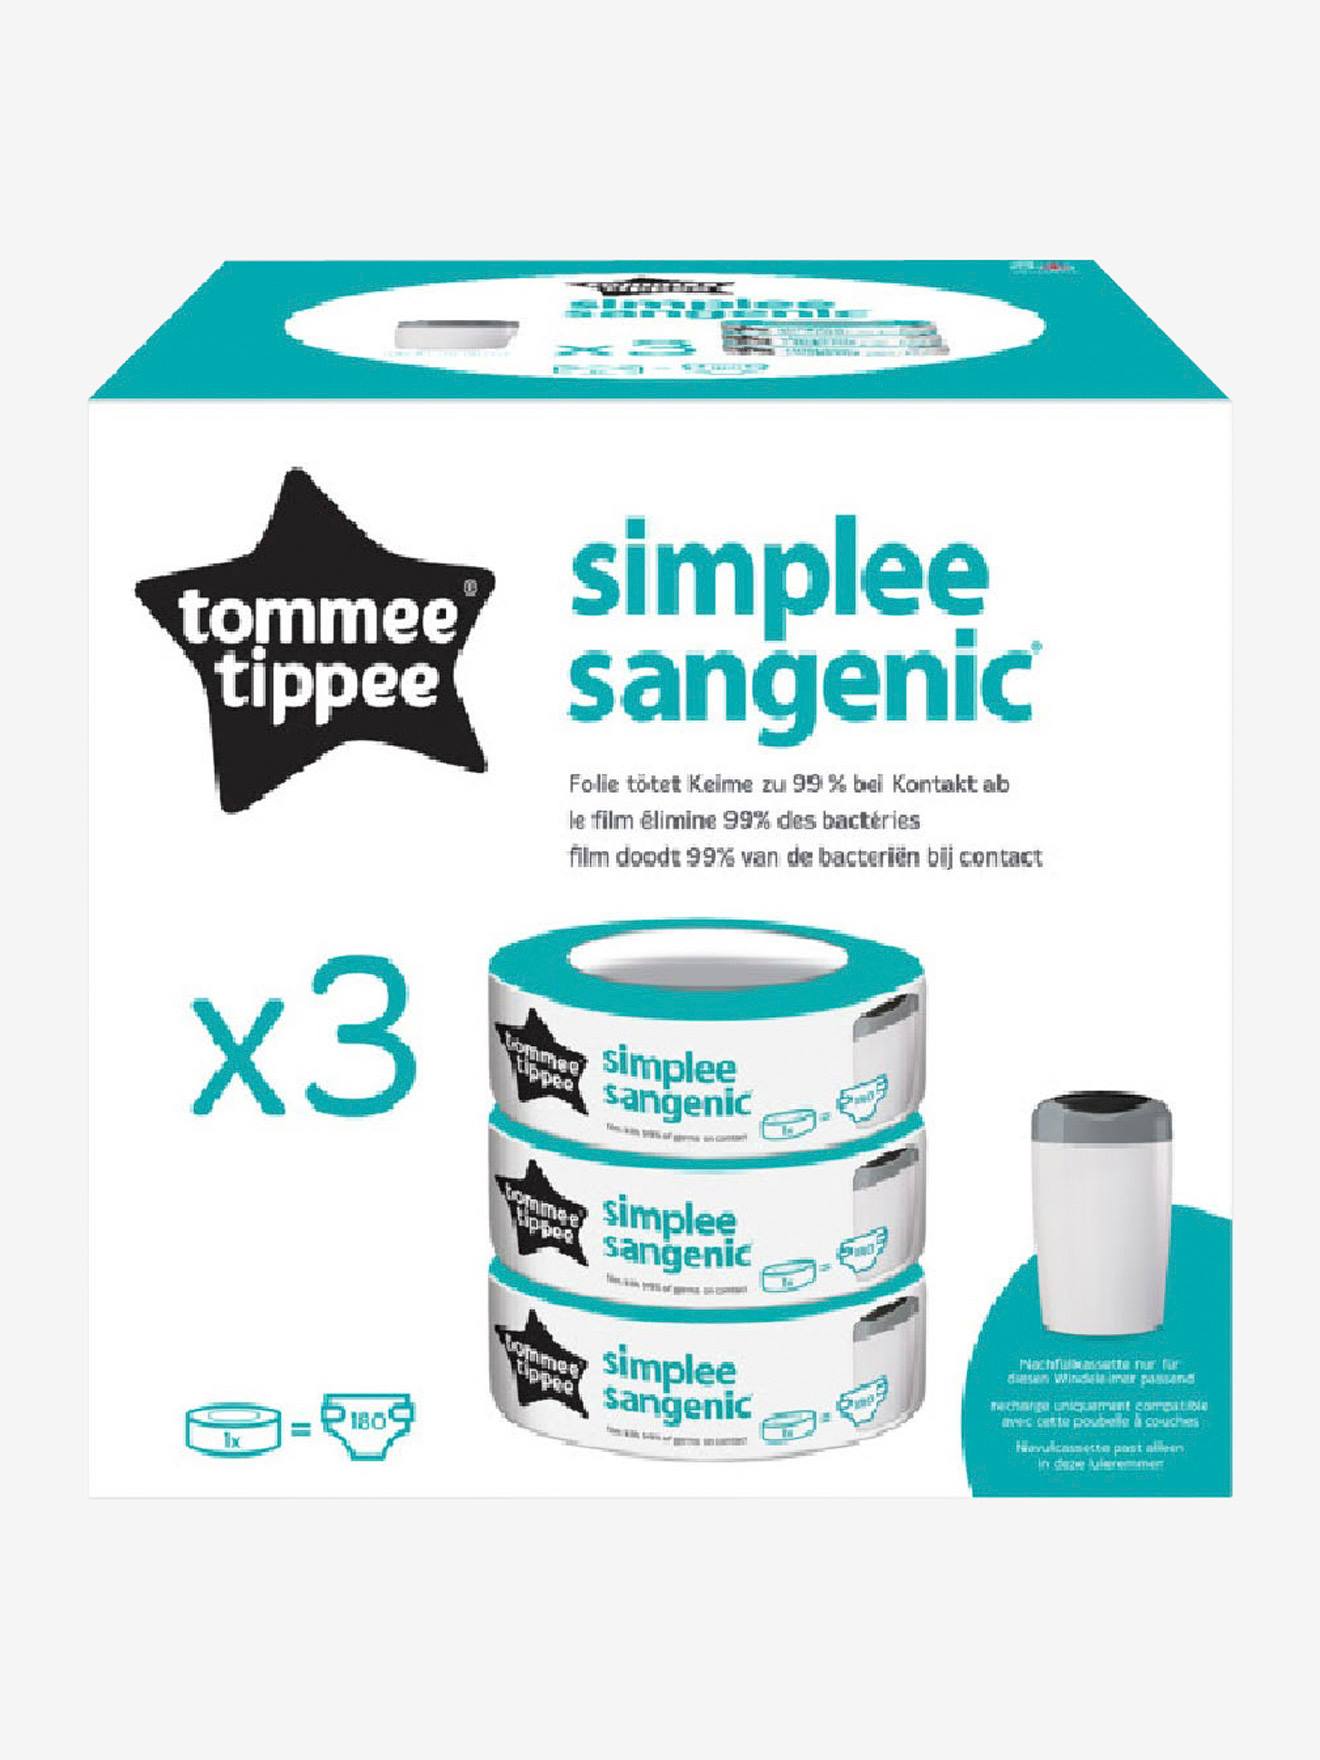 Recharge Poubelle Simplee Sangenic de Tommee Tippee, Recharges